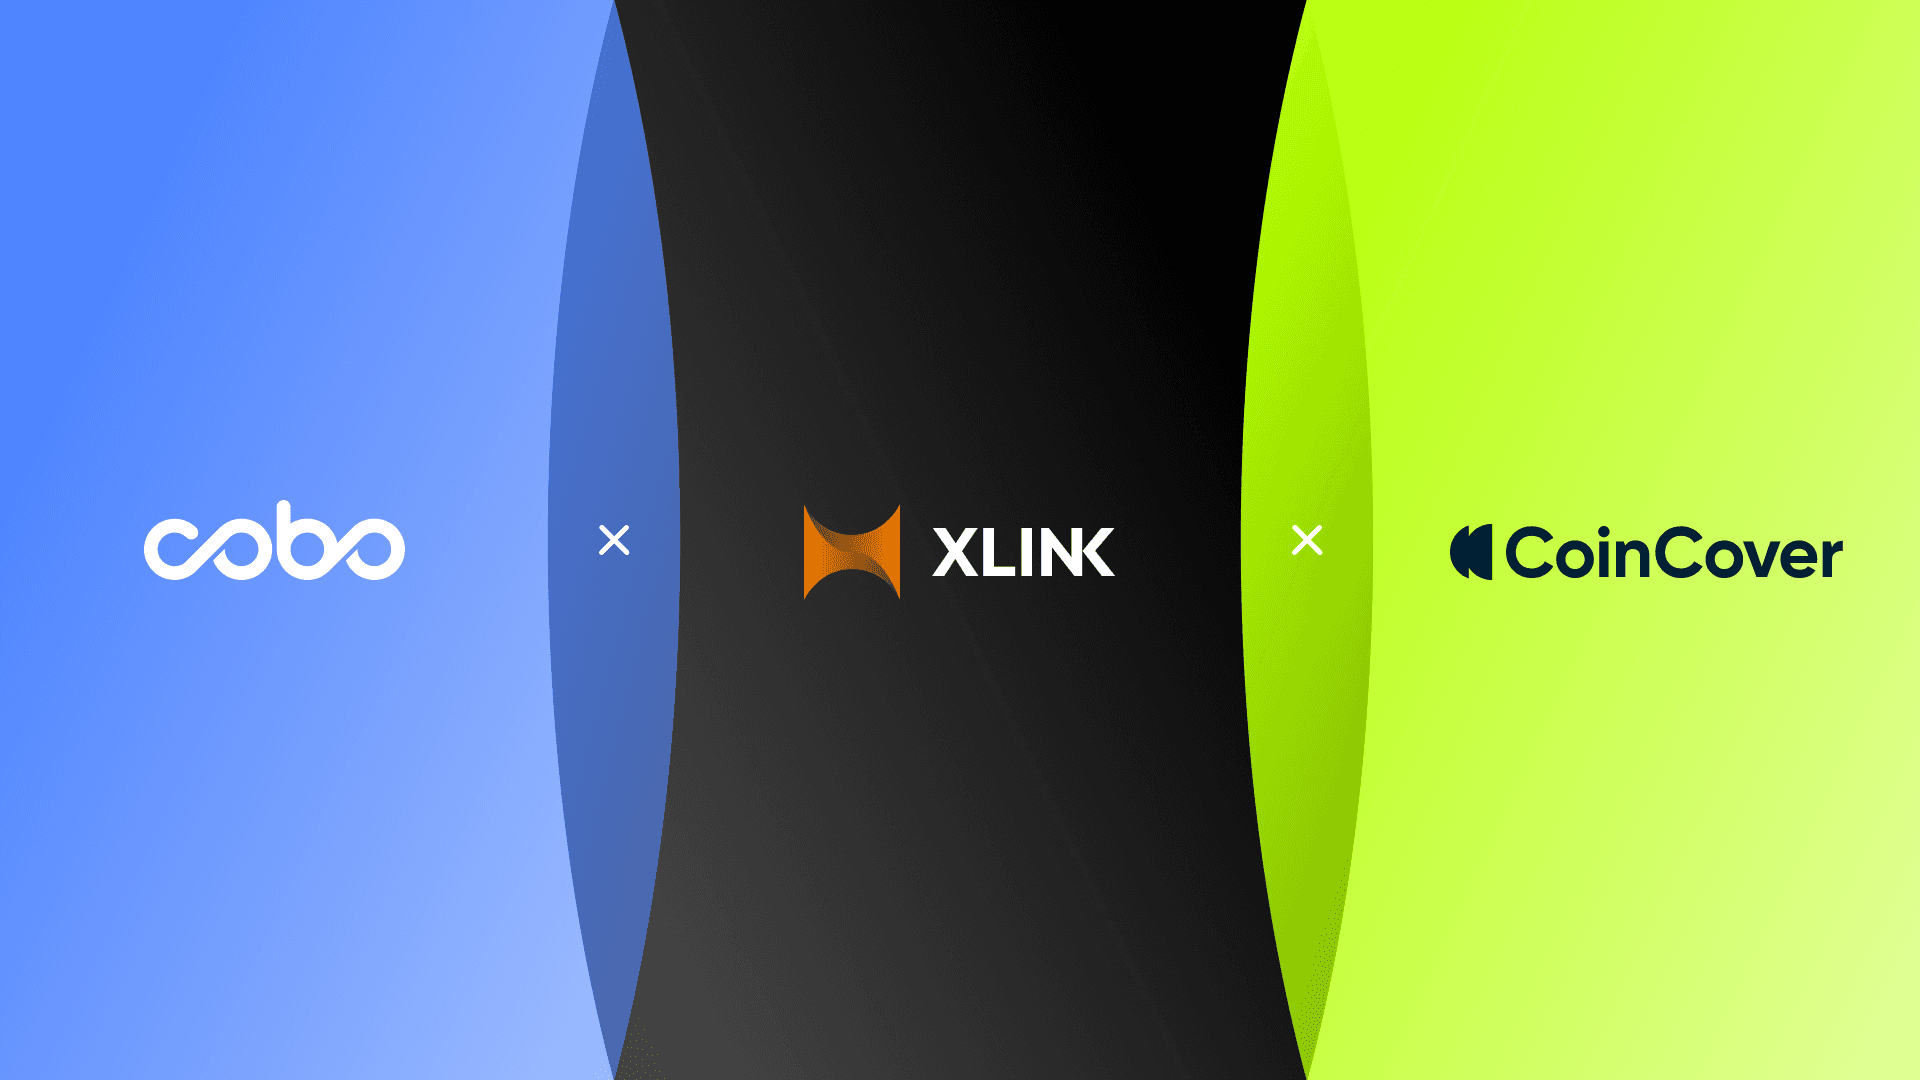 Cobo and Coincover Join Forces with XLink to Drive Bitcoin’s Evolution into DeFi Using MPC Custody Technology and Disaster Recovery Capabilities